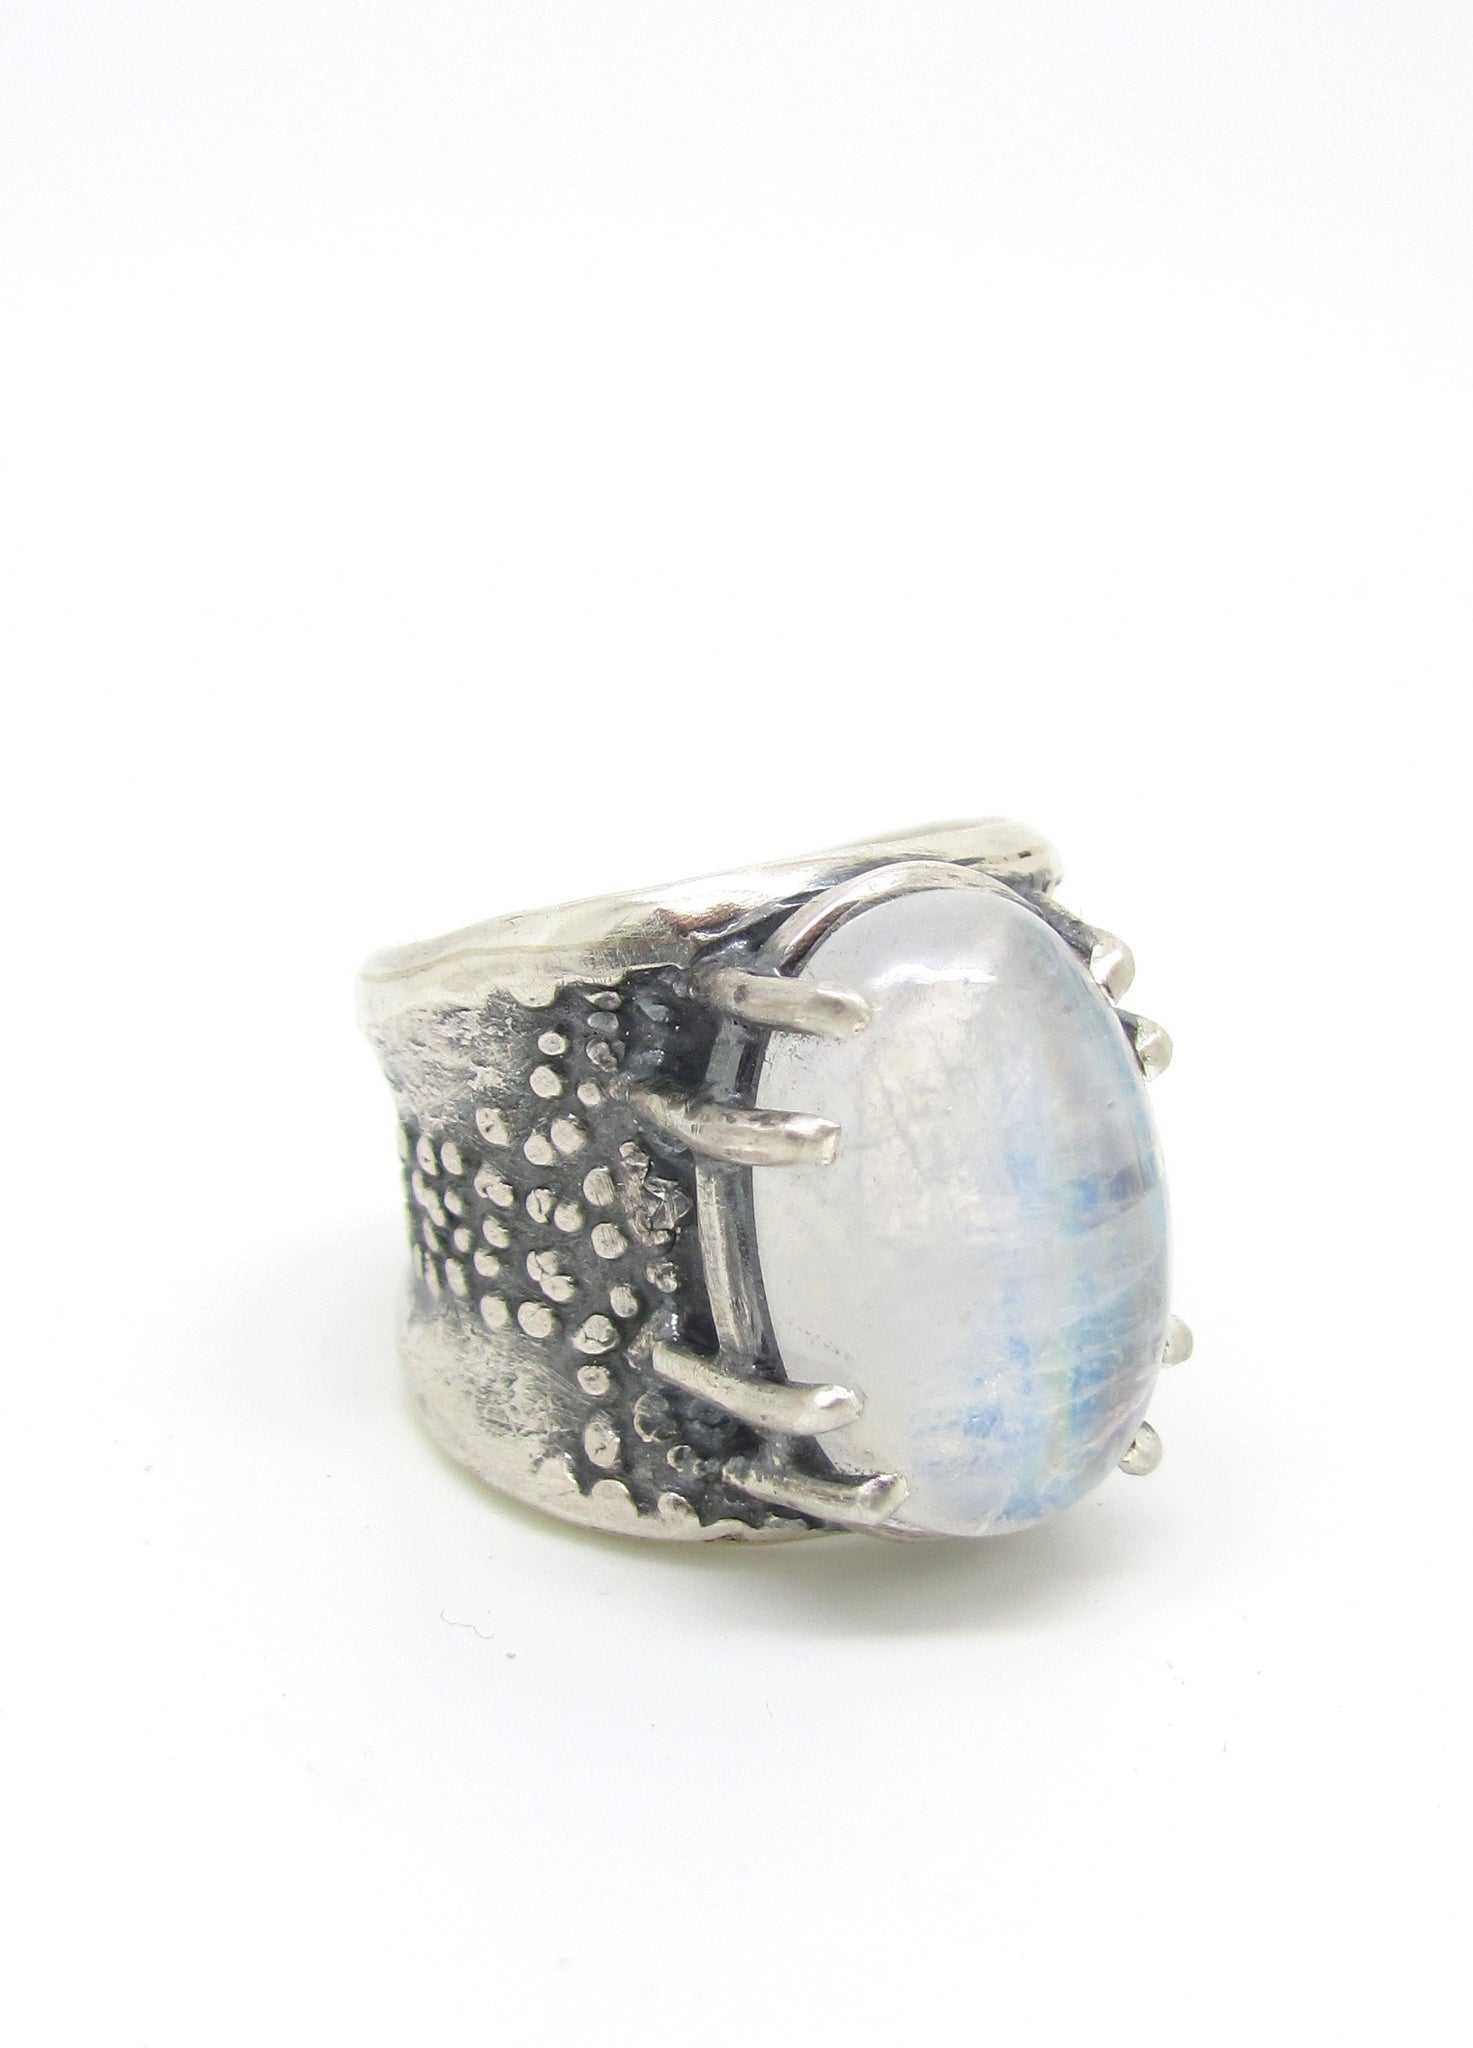 Moonstone with Textured Lizard Band